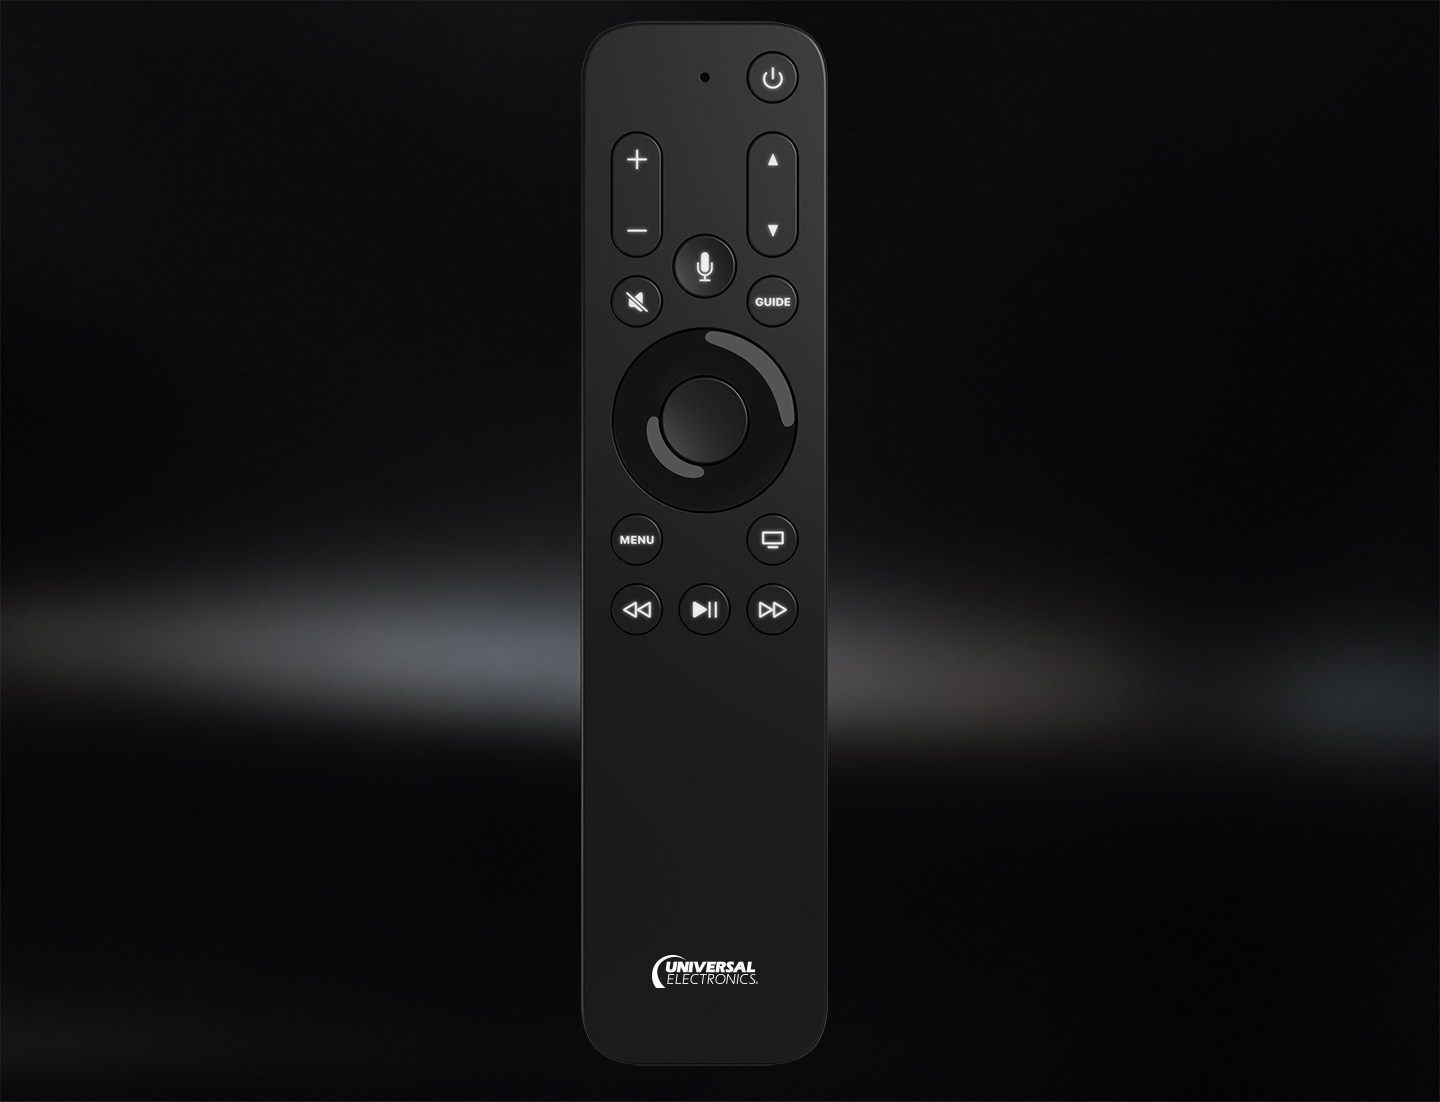 Universal Electronics is Launching an Apple TV Remote Control